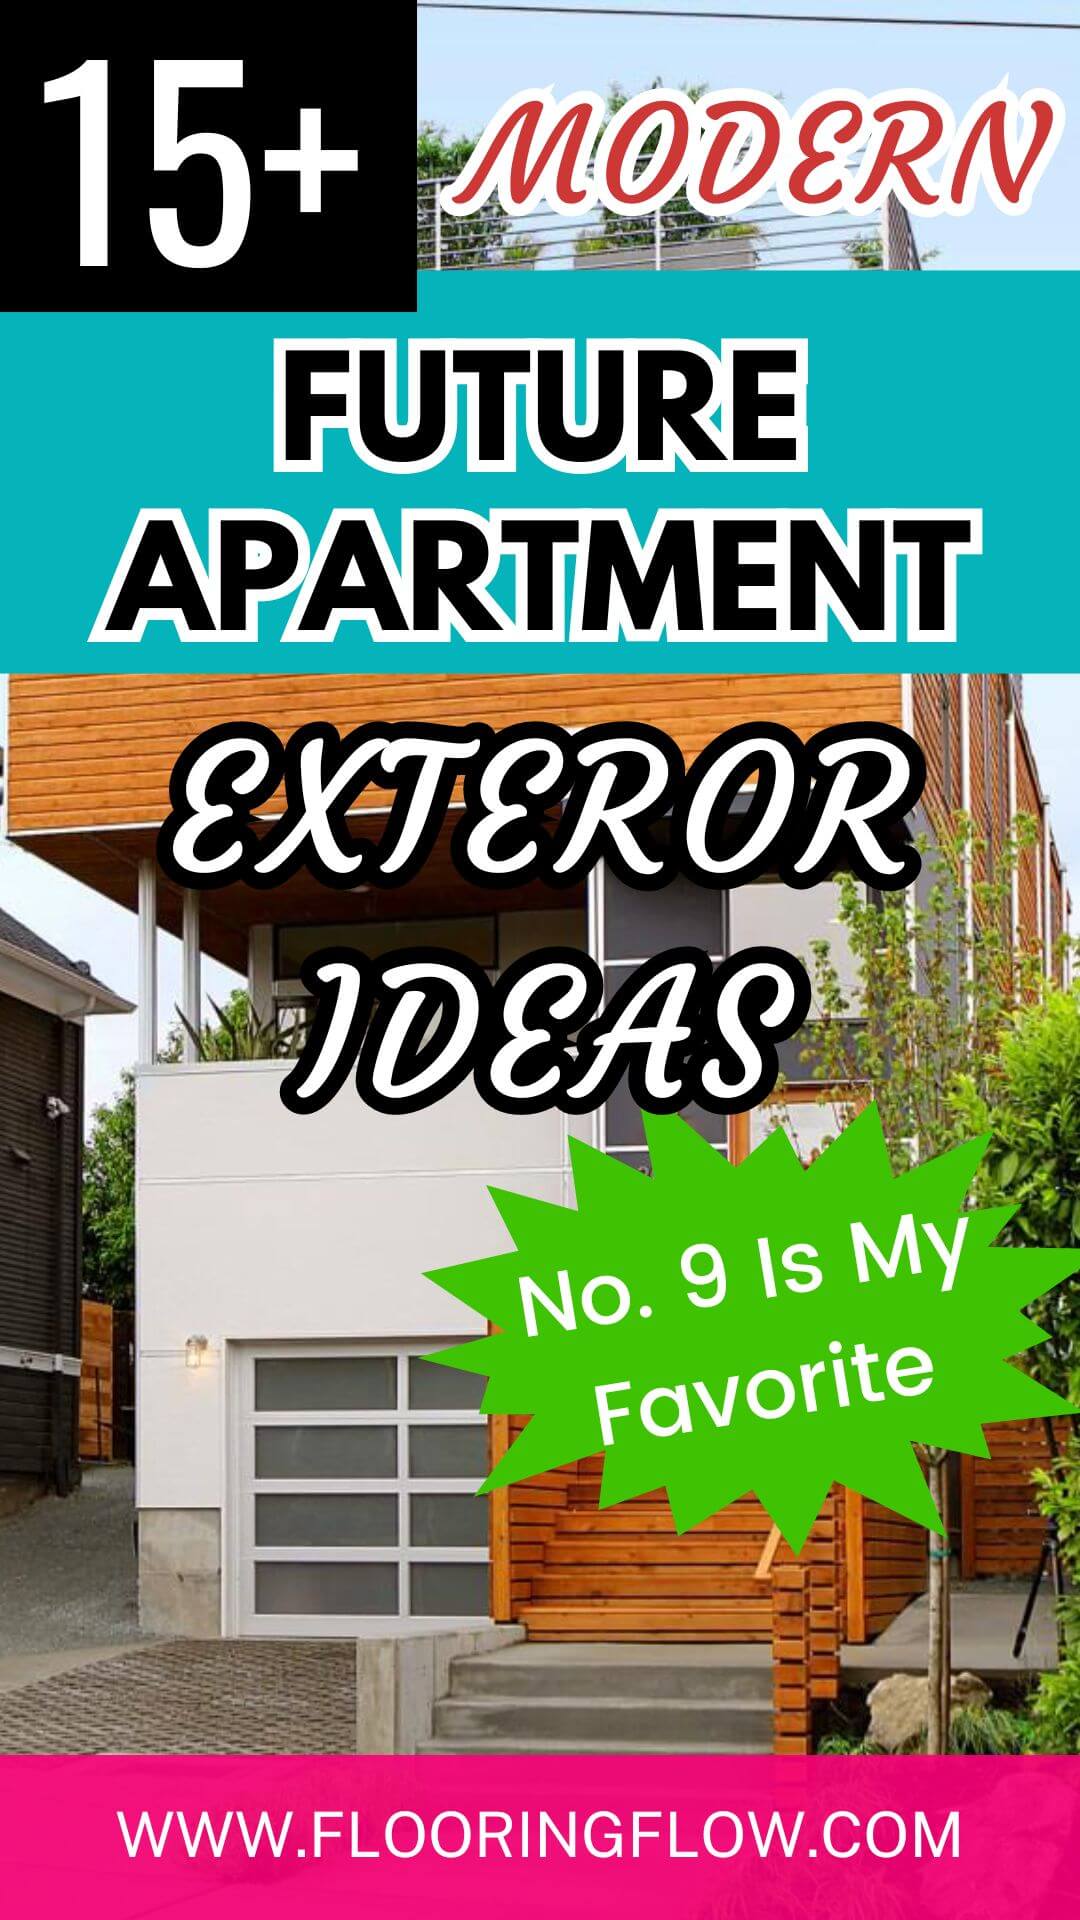 Modern Exterior Ideas for Your Future Apartment